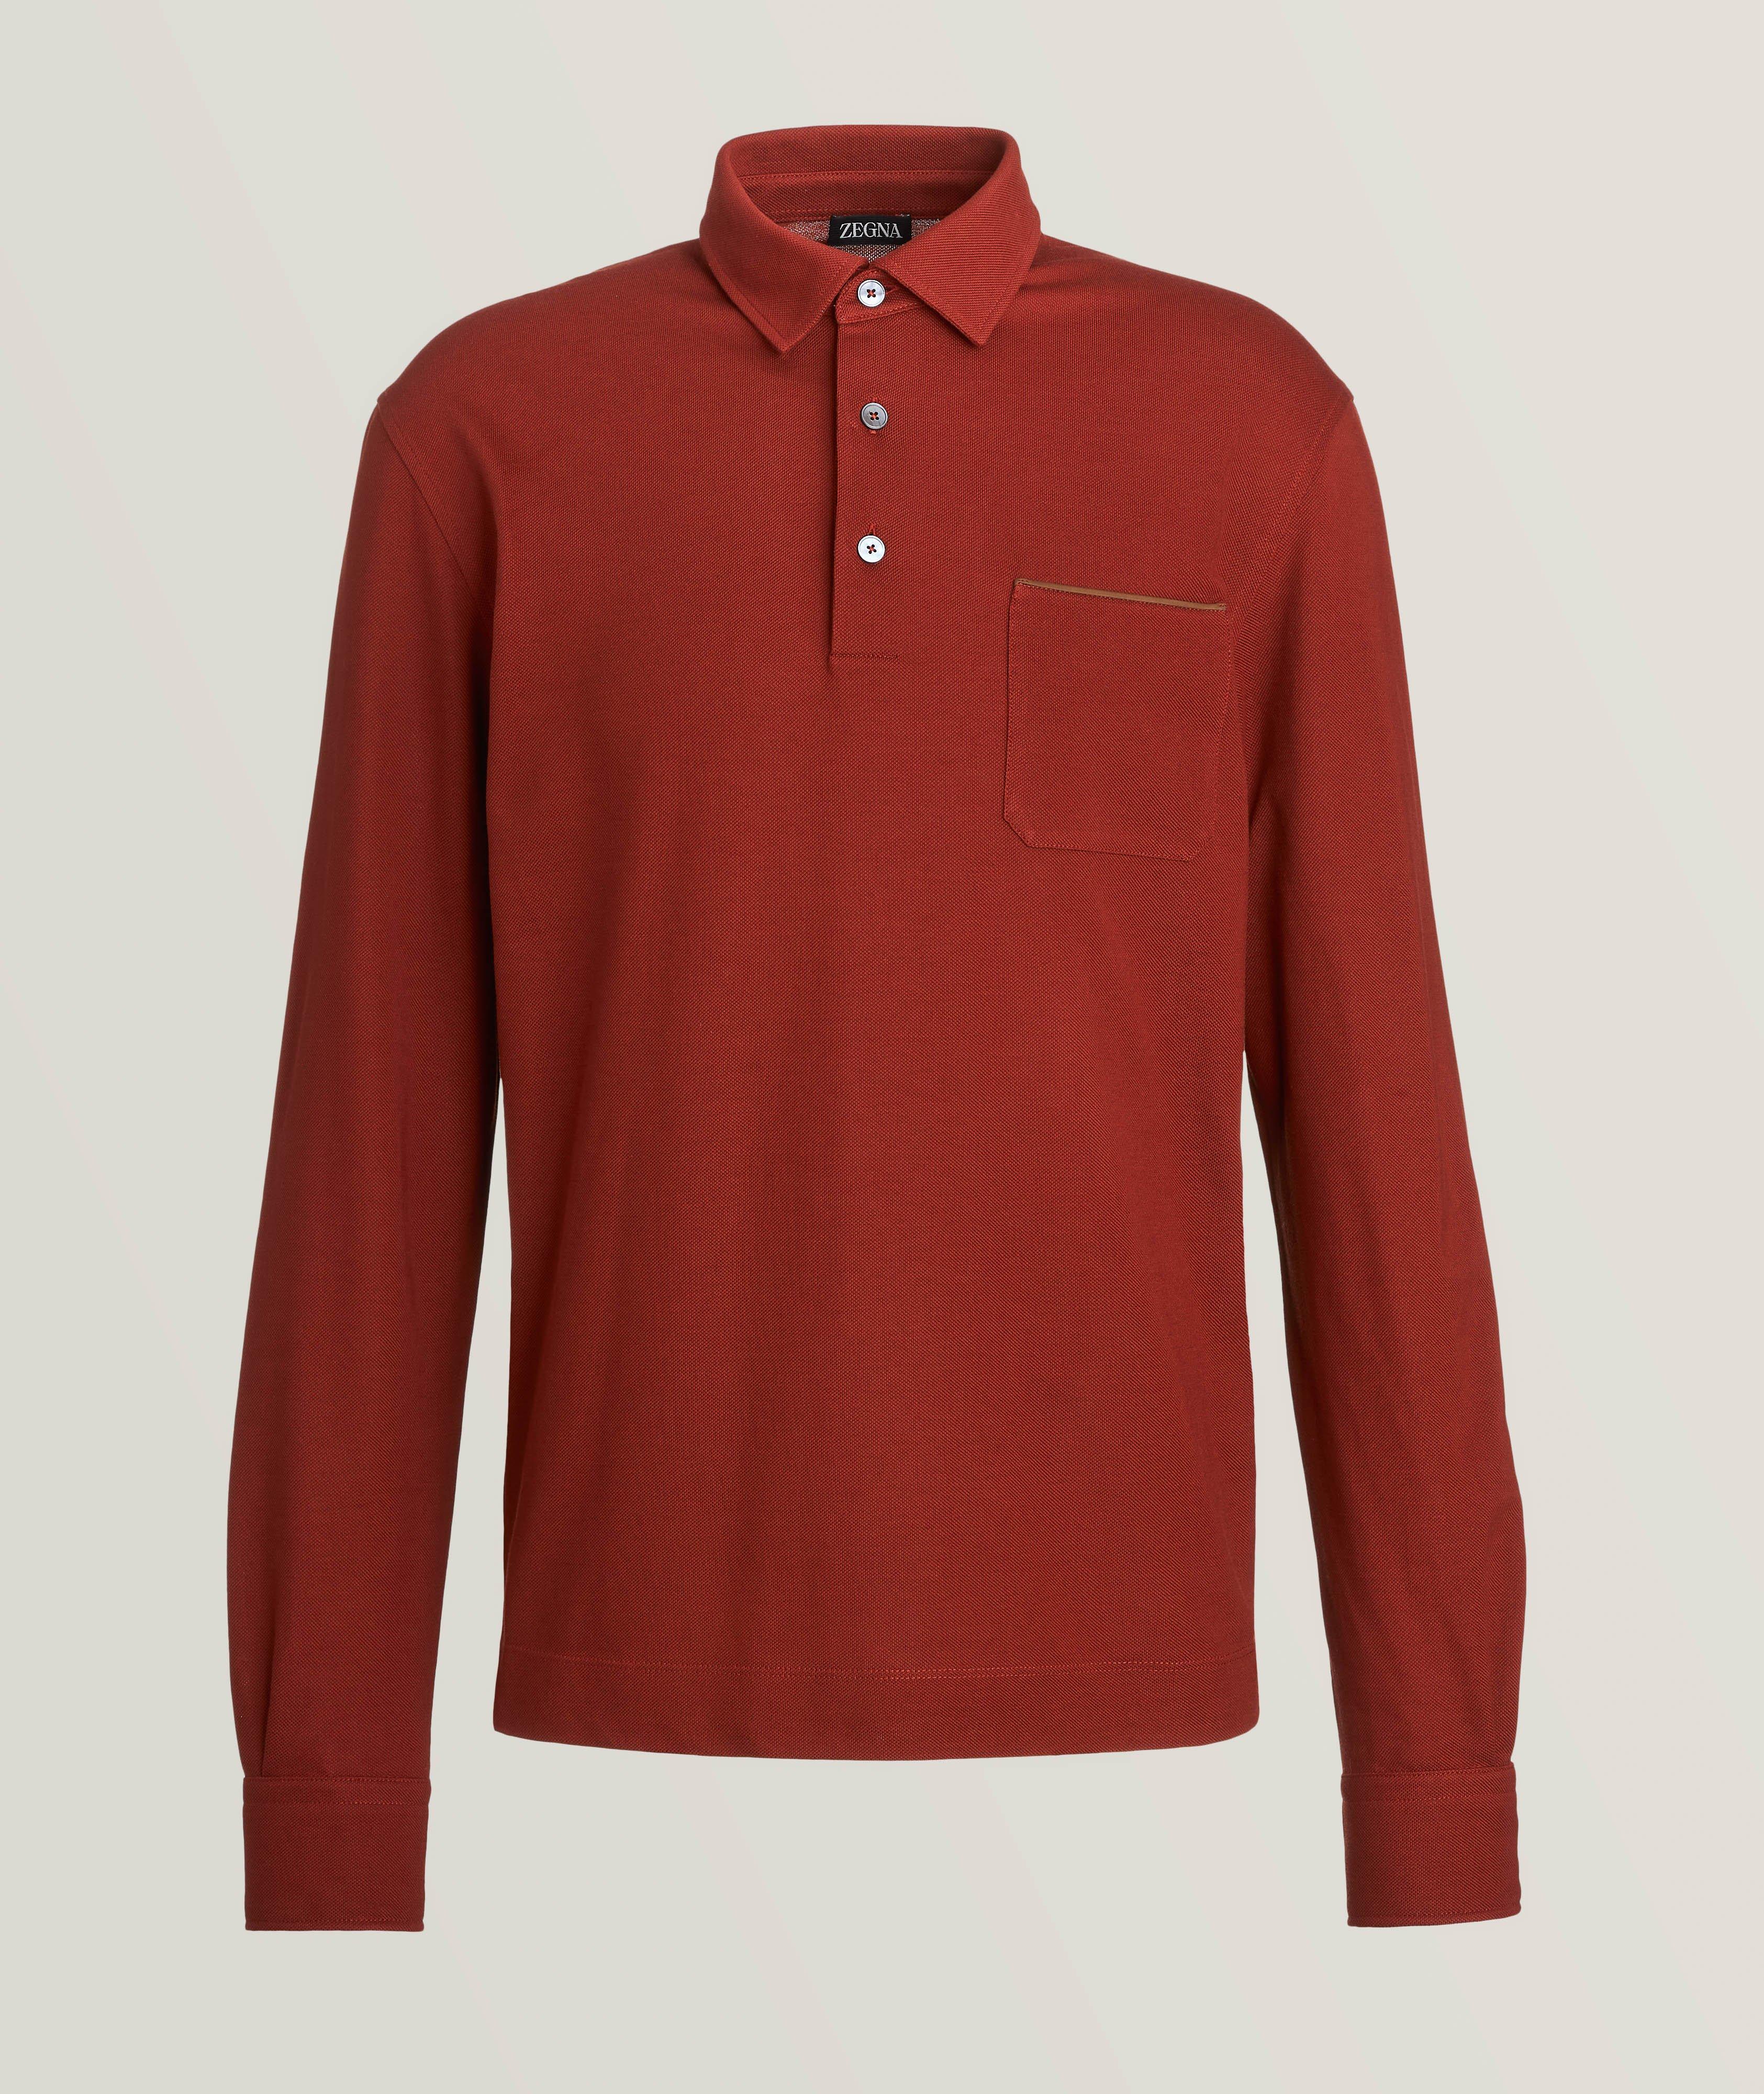 Contrast Suede Tipped Pocket Cotton Polo  image 0